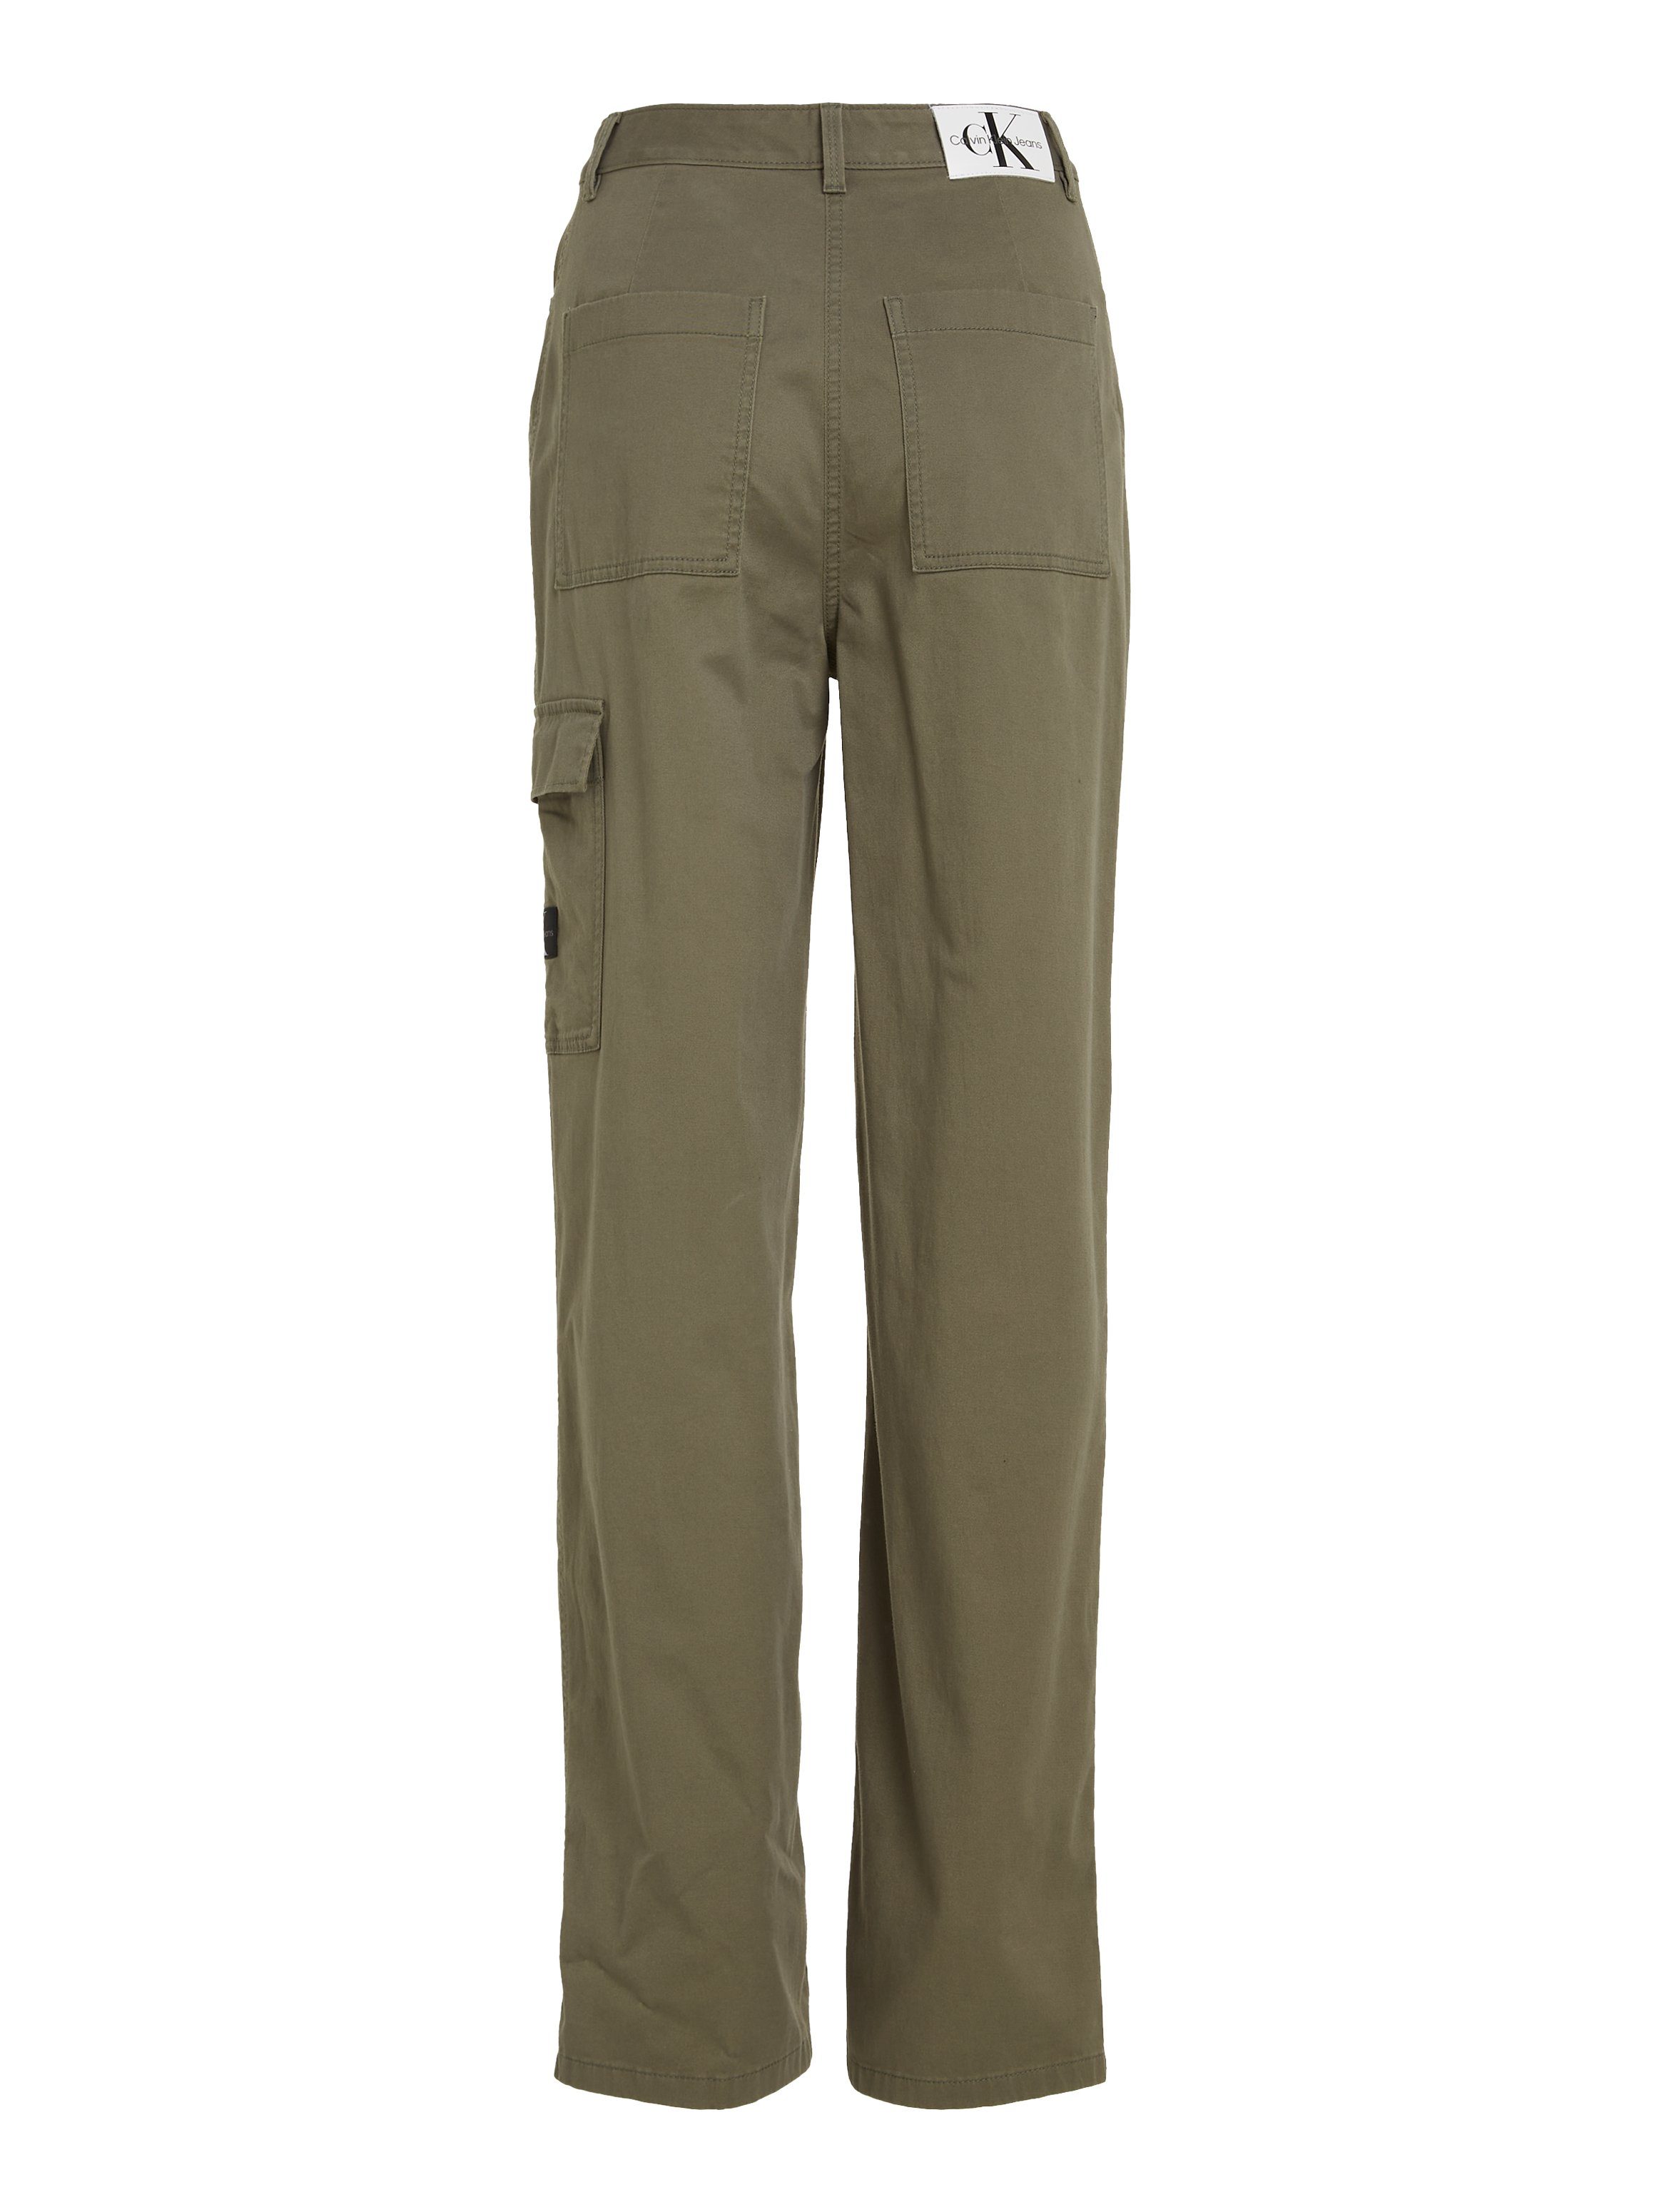 Dusty RISE HIGH Stretch-Hose Calvin Jeans TWILL Olive STRAIGHT Klein STRETCH